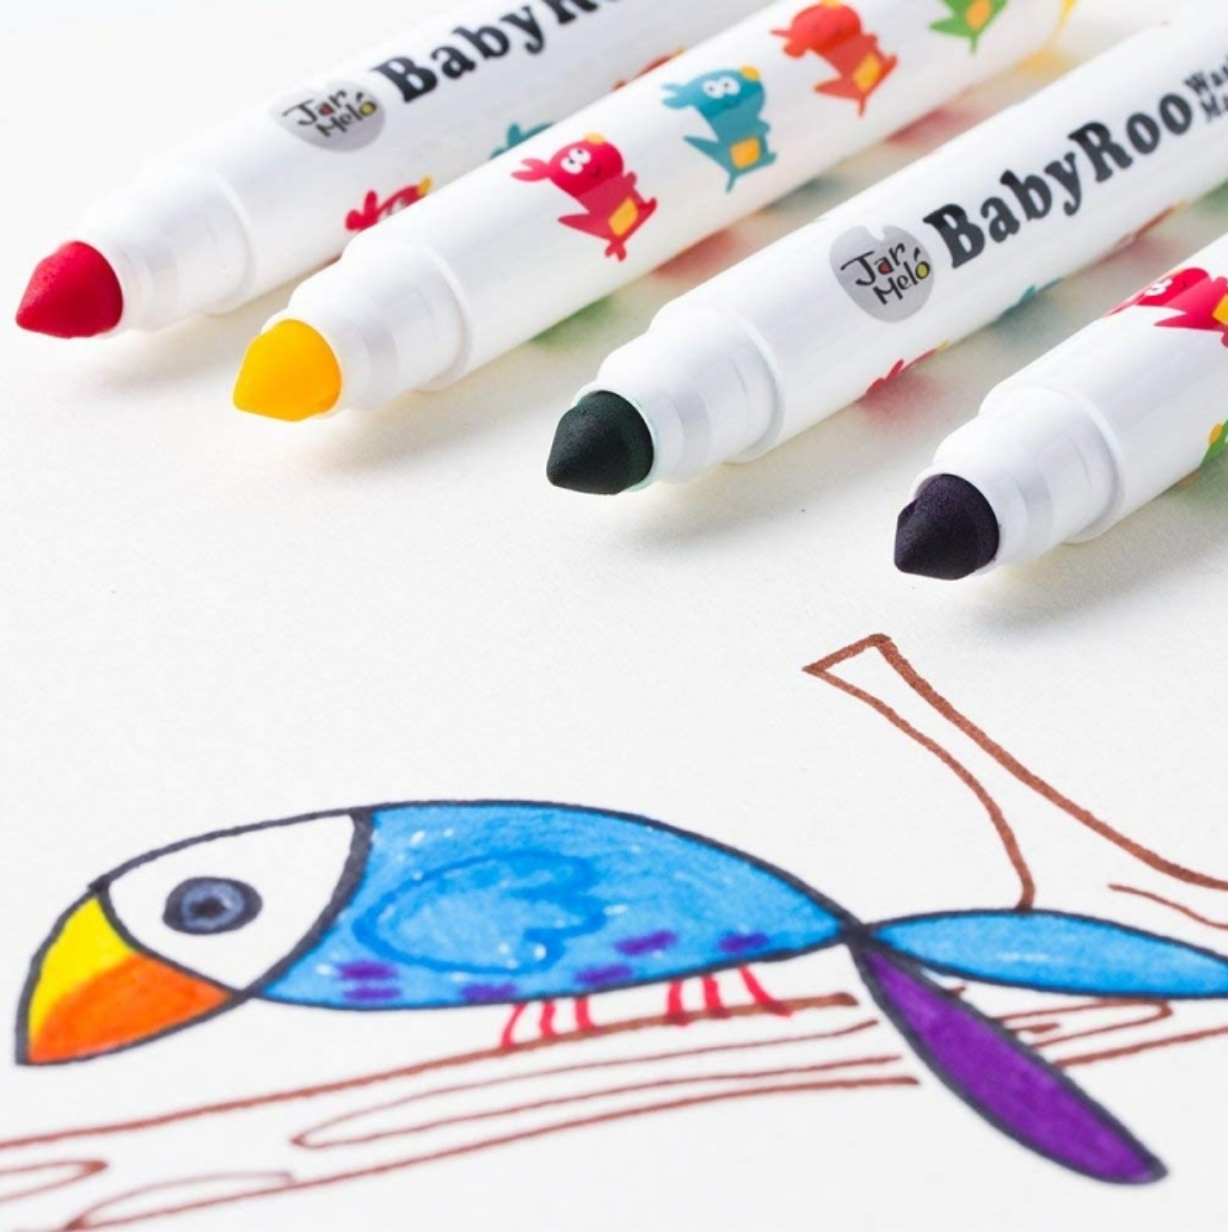 Joan Miro Silky Washable Markers - Baby Roo (12 colors)